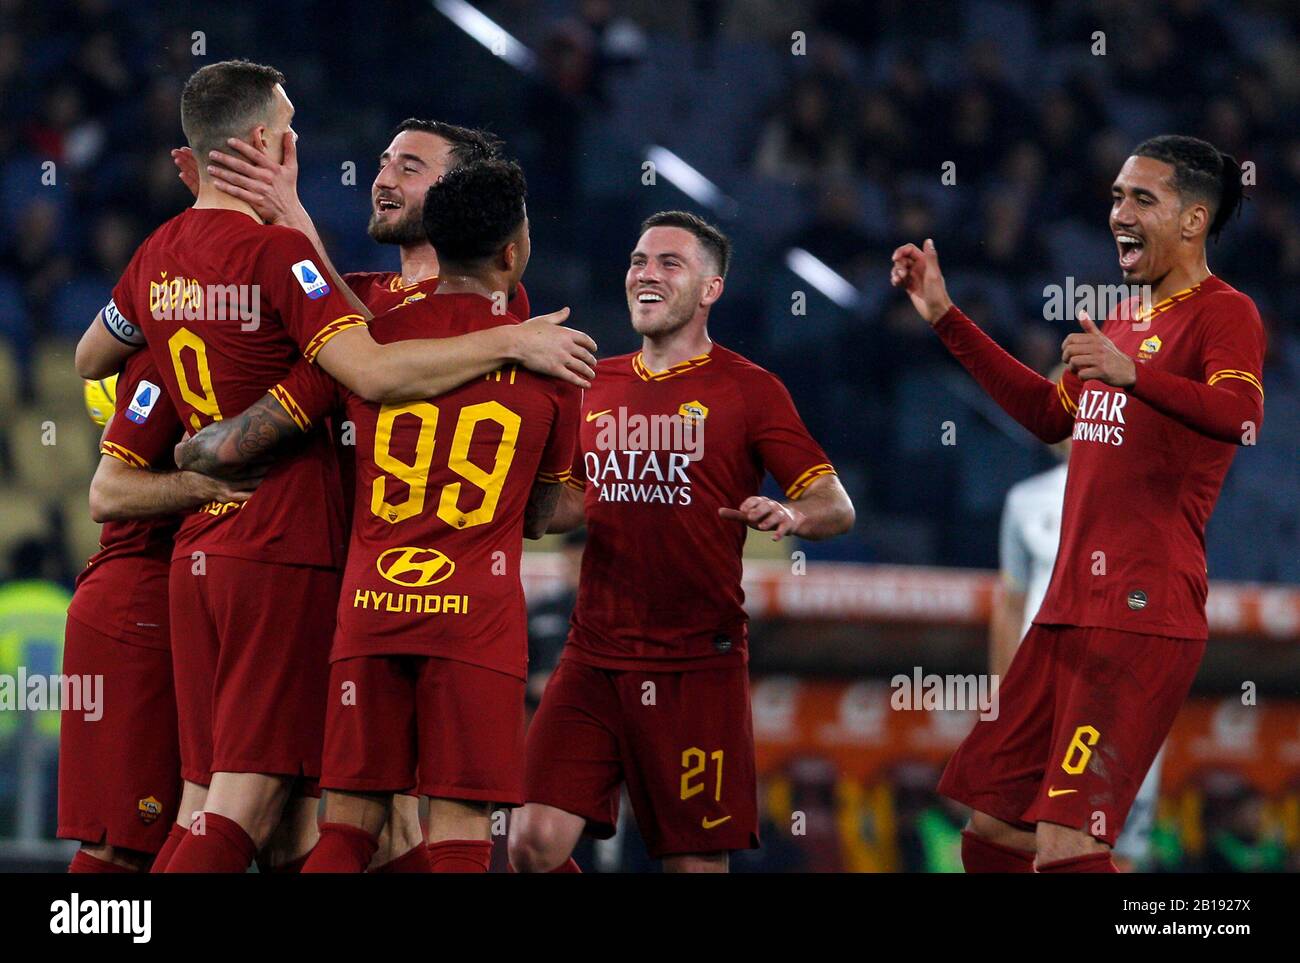 Rome, Italy. 23rd Feb, 2020. Roma s Edin Dzeko, left, is congratulated by his teammates after scoring during the Serie A soccer match between Roma and Lecce at the Olympic Stadium. Credit: Update Images/Alamy Live News Stock Photo